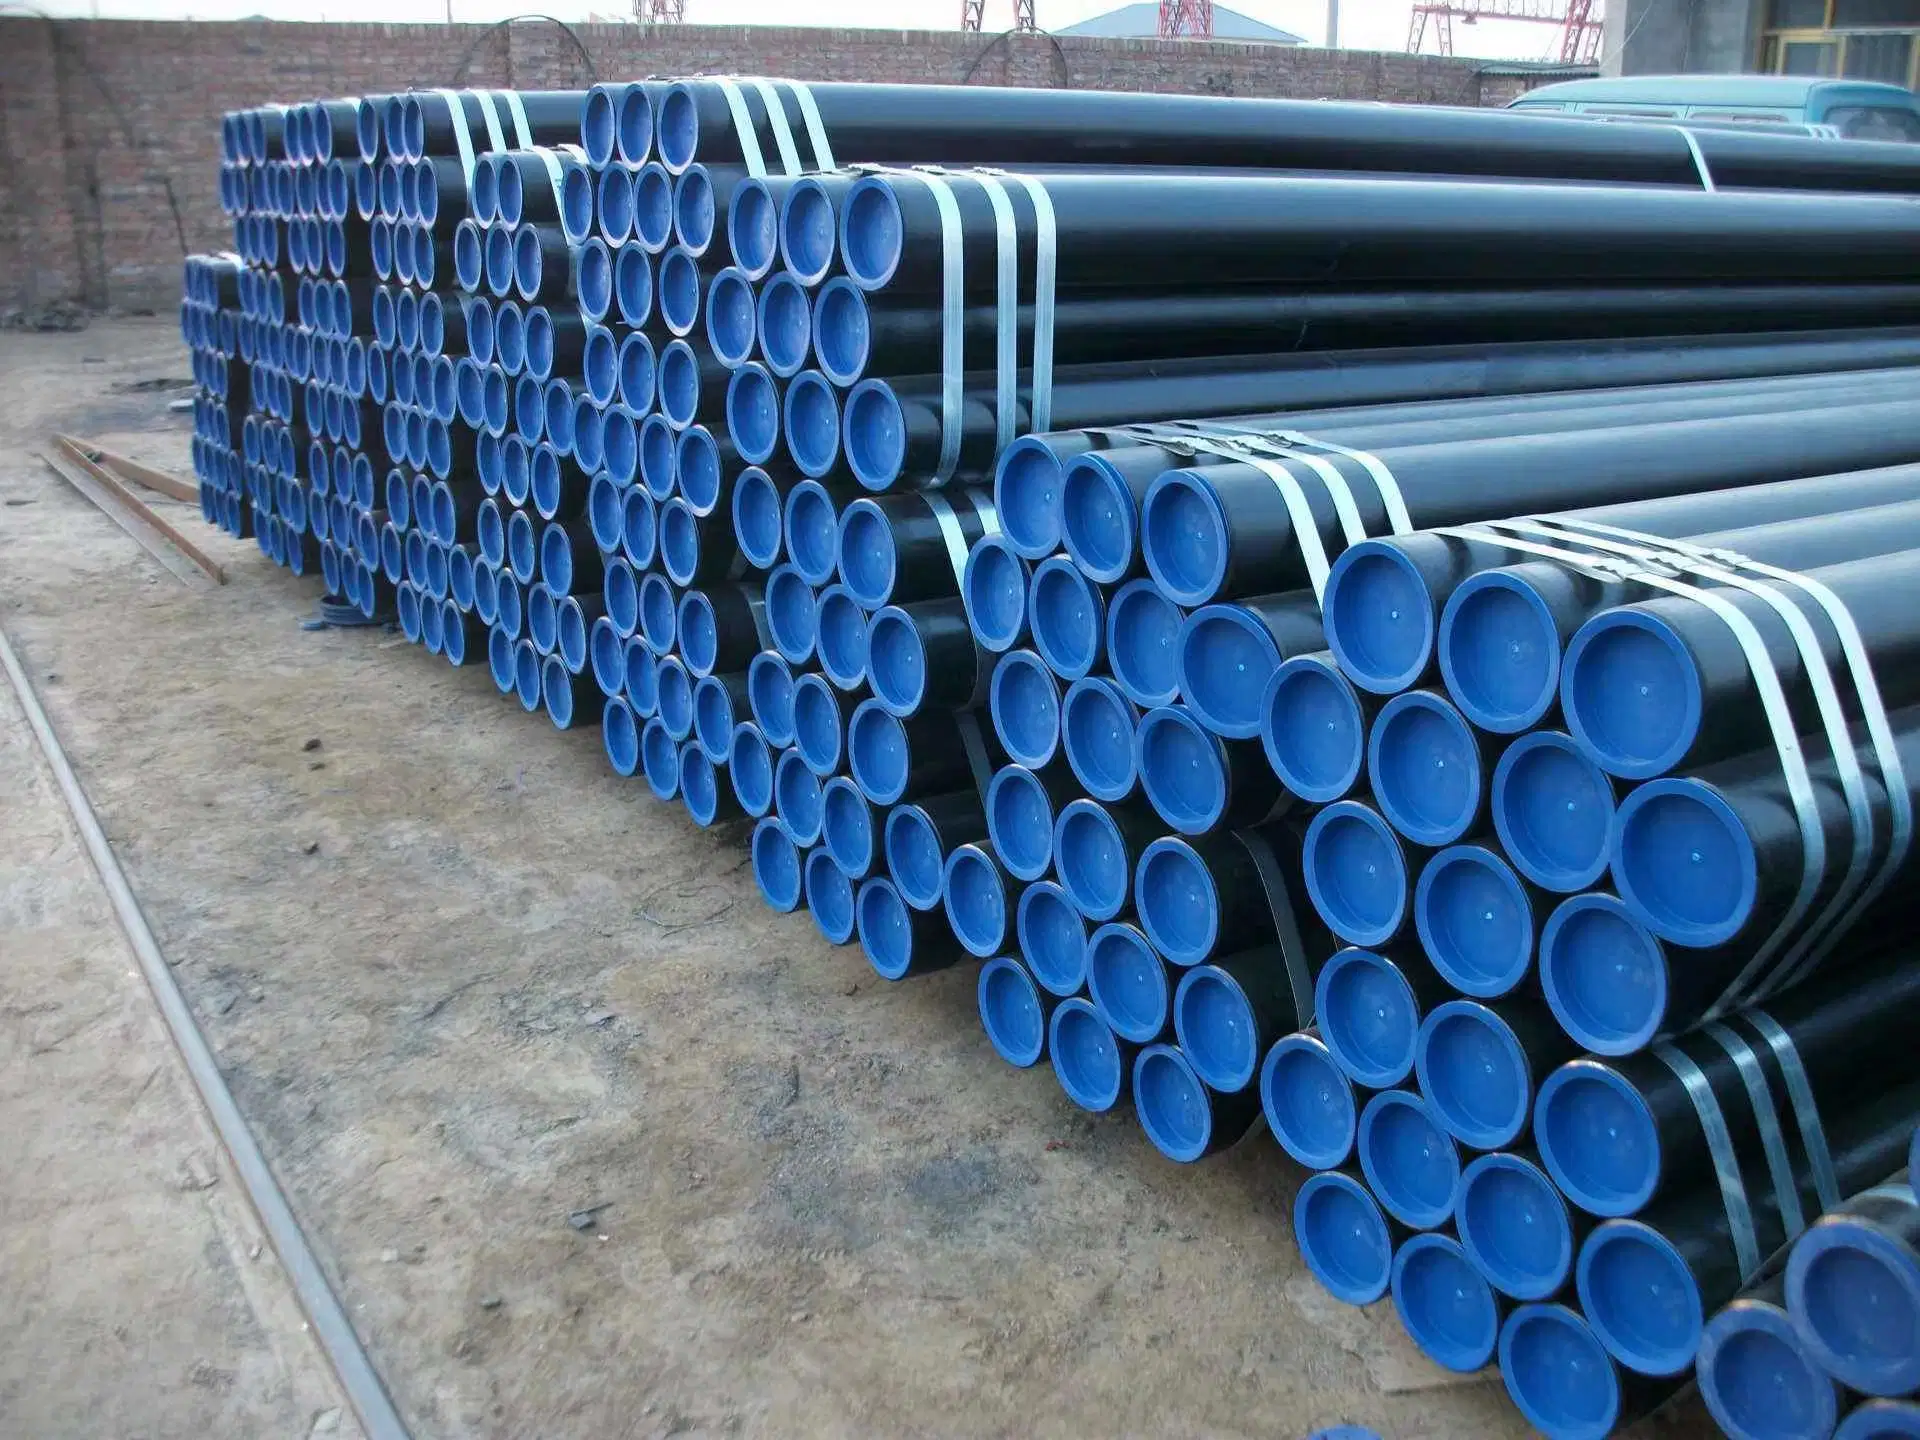 Anti-Corrosion Seamless Oil Casing Steel Drilling Pipe for Oil and Gas Wells